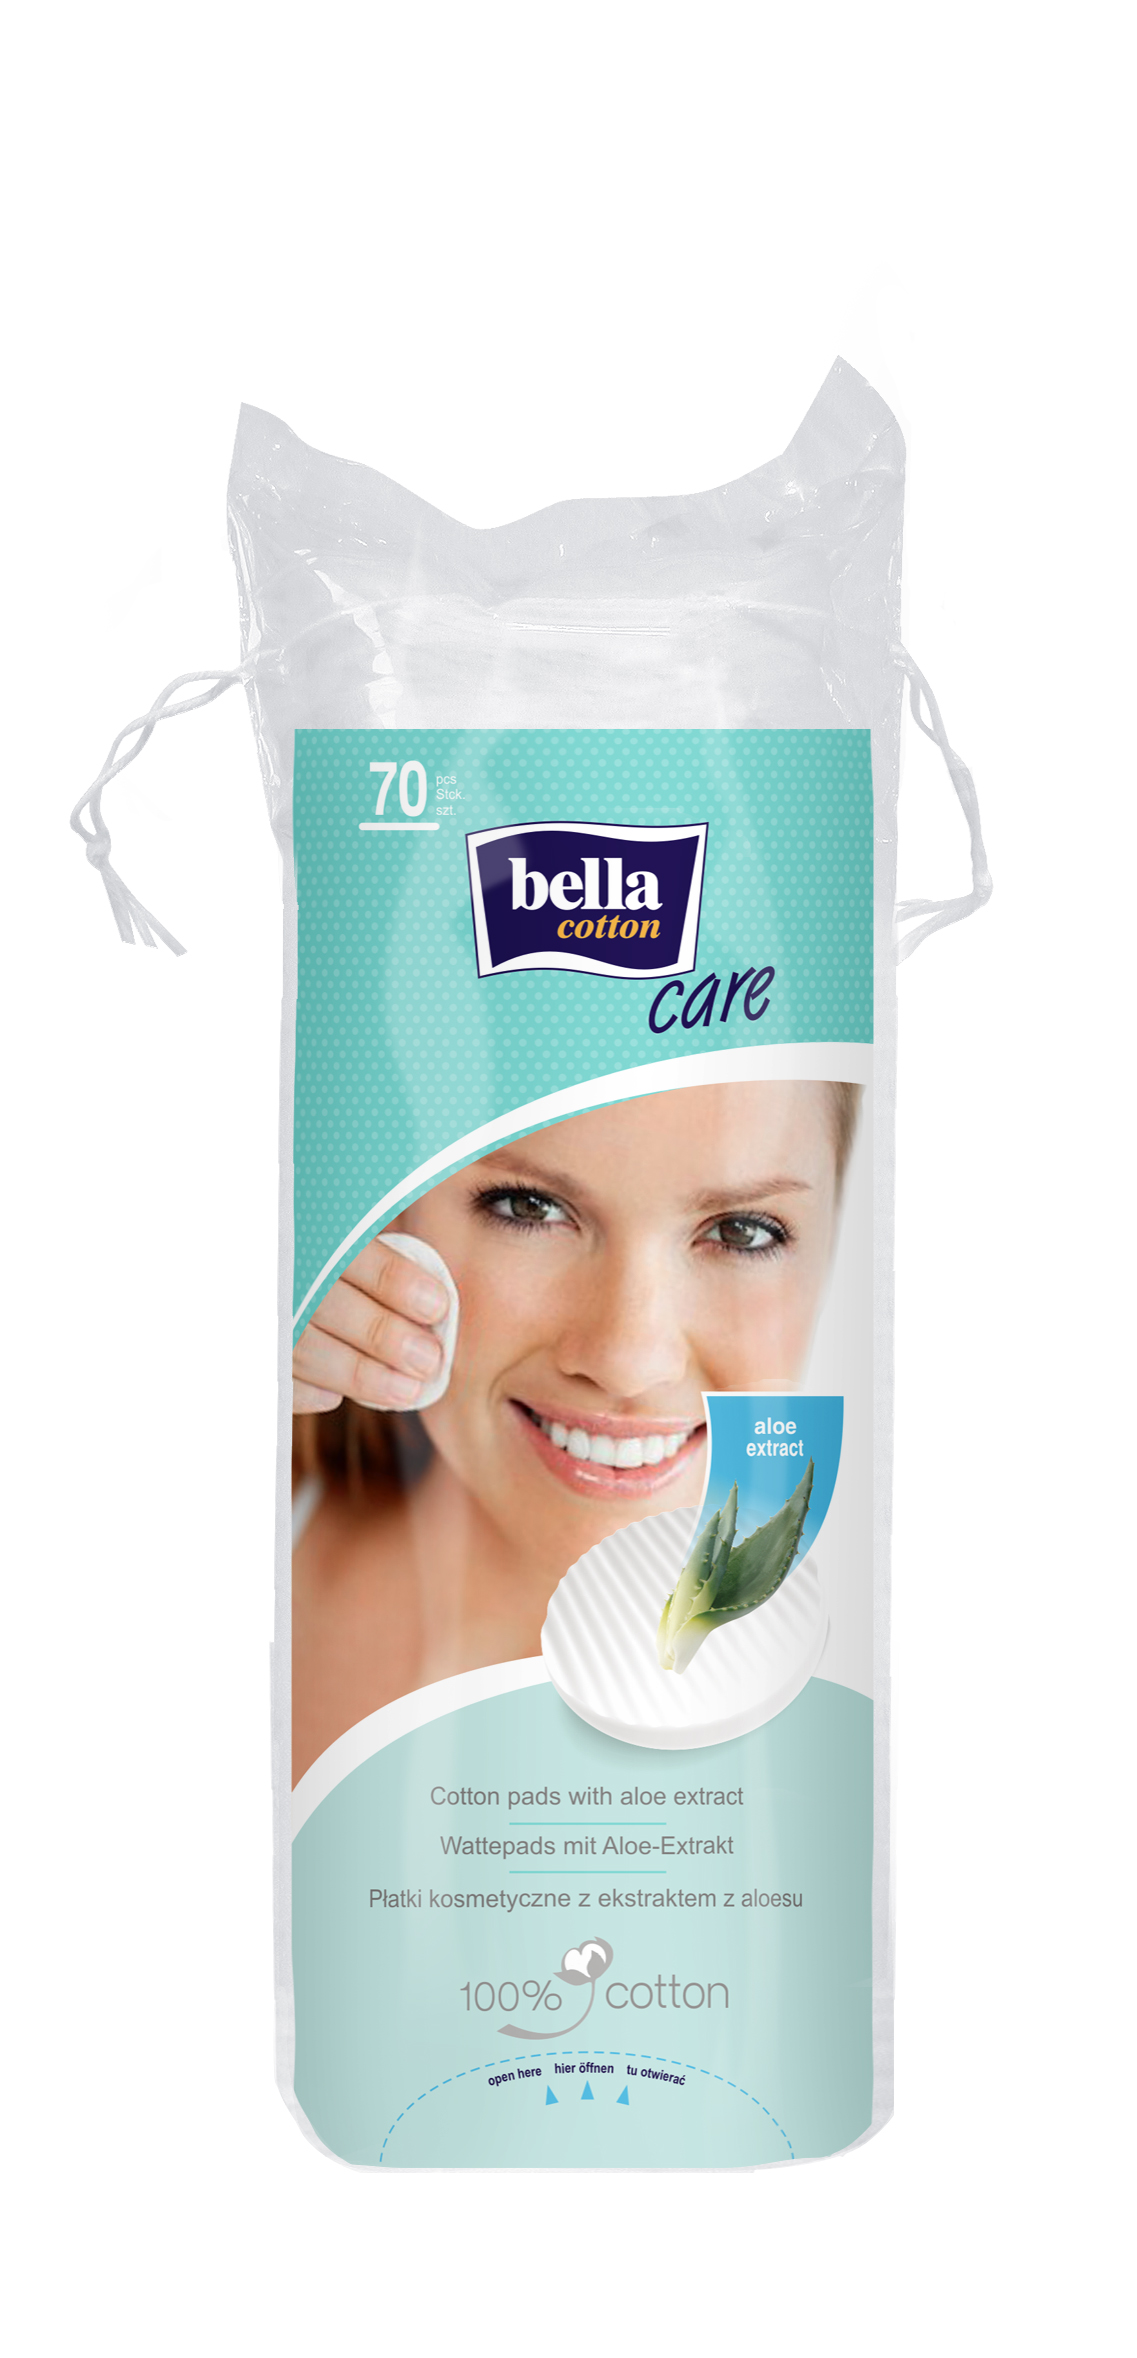 Buy BELLA COTTON PADS ROUND WITH ALOE VERA EXTRACT 70 PCS at Best Price Online